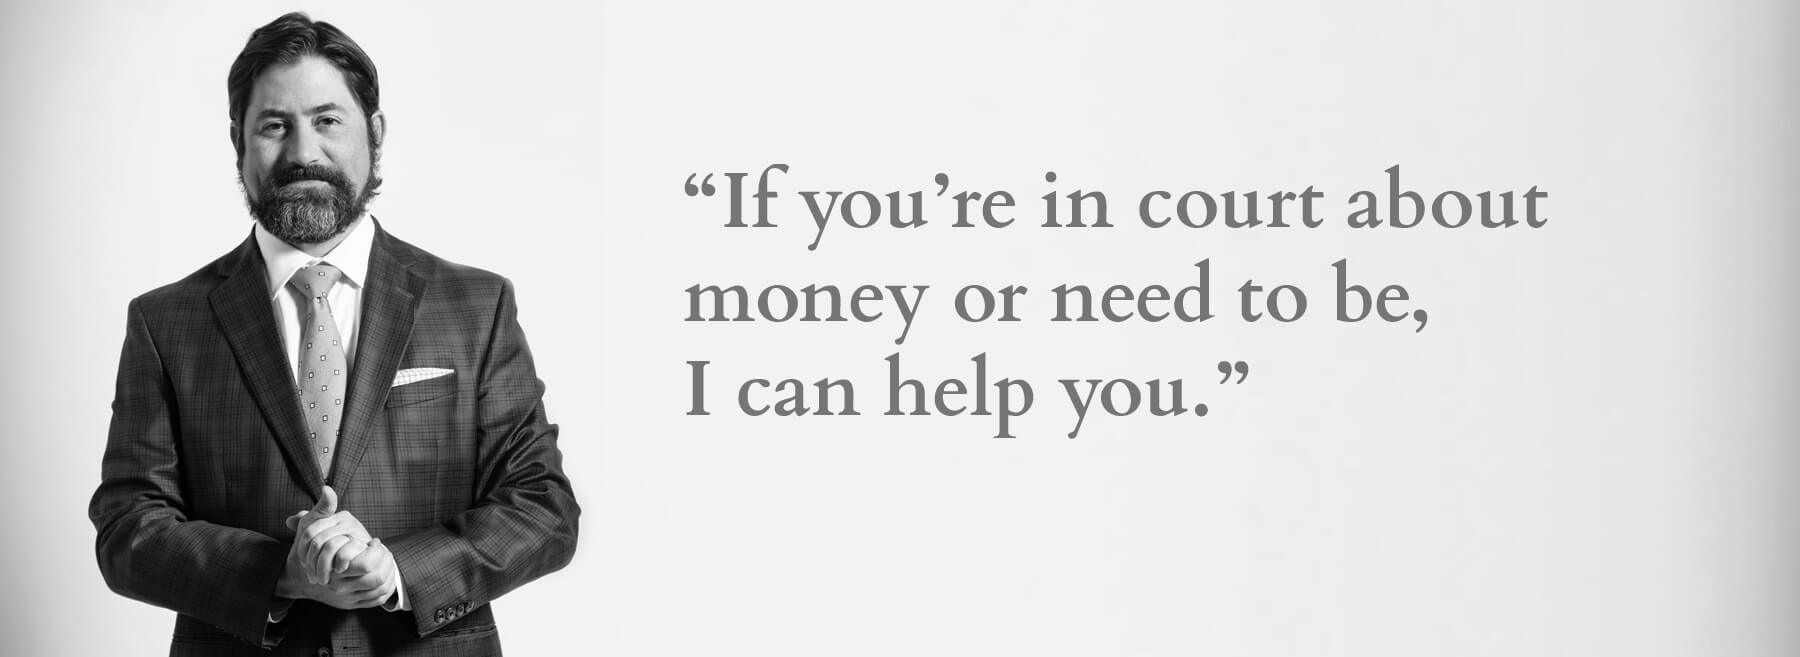 If you’re in court about money or need to be, I can probably help you. Edward Miller